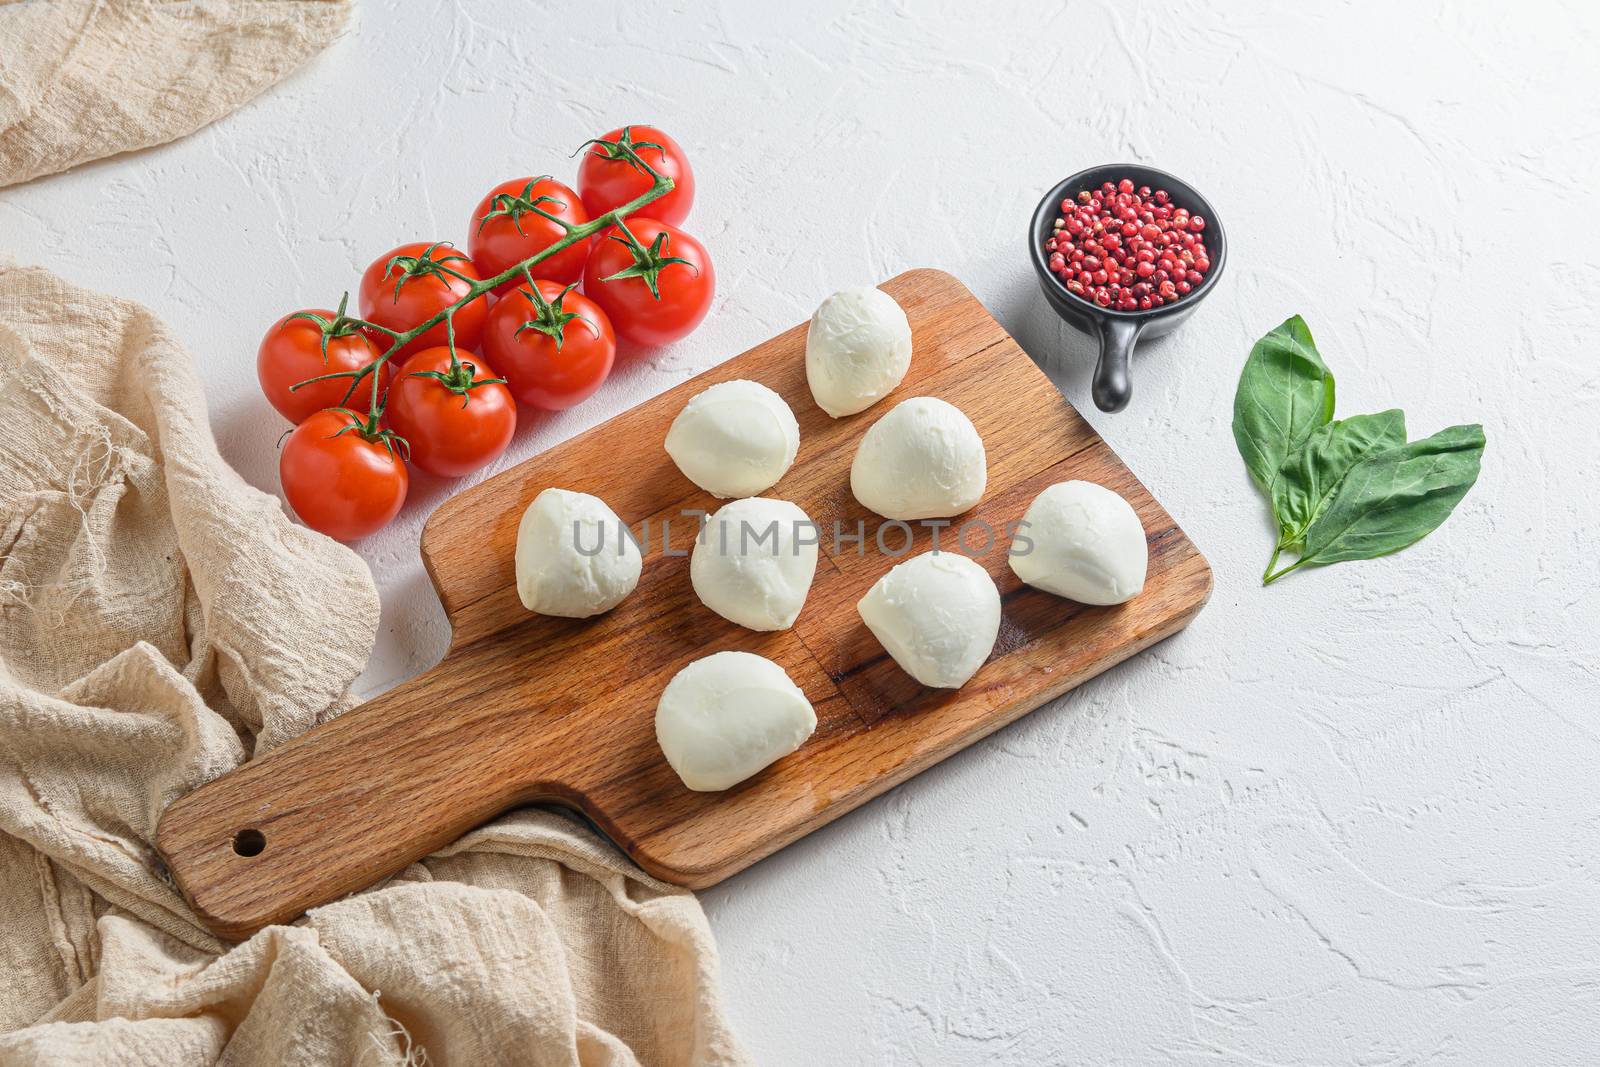 Mini balls of mozzarella cheese, on chop wood board ingredients for salad Caprese. over white background. Top view by Ilianesolenyi